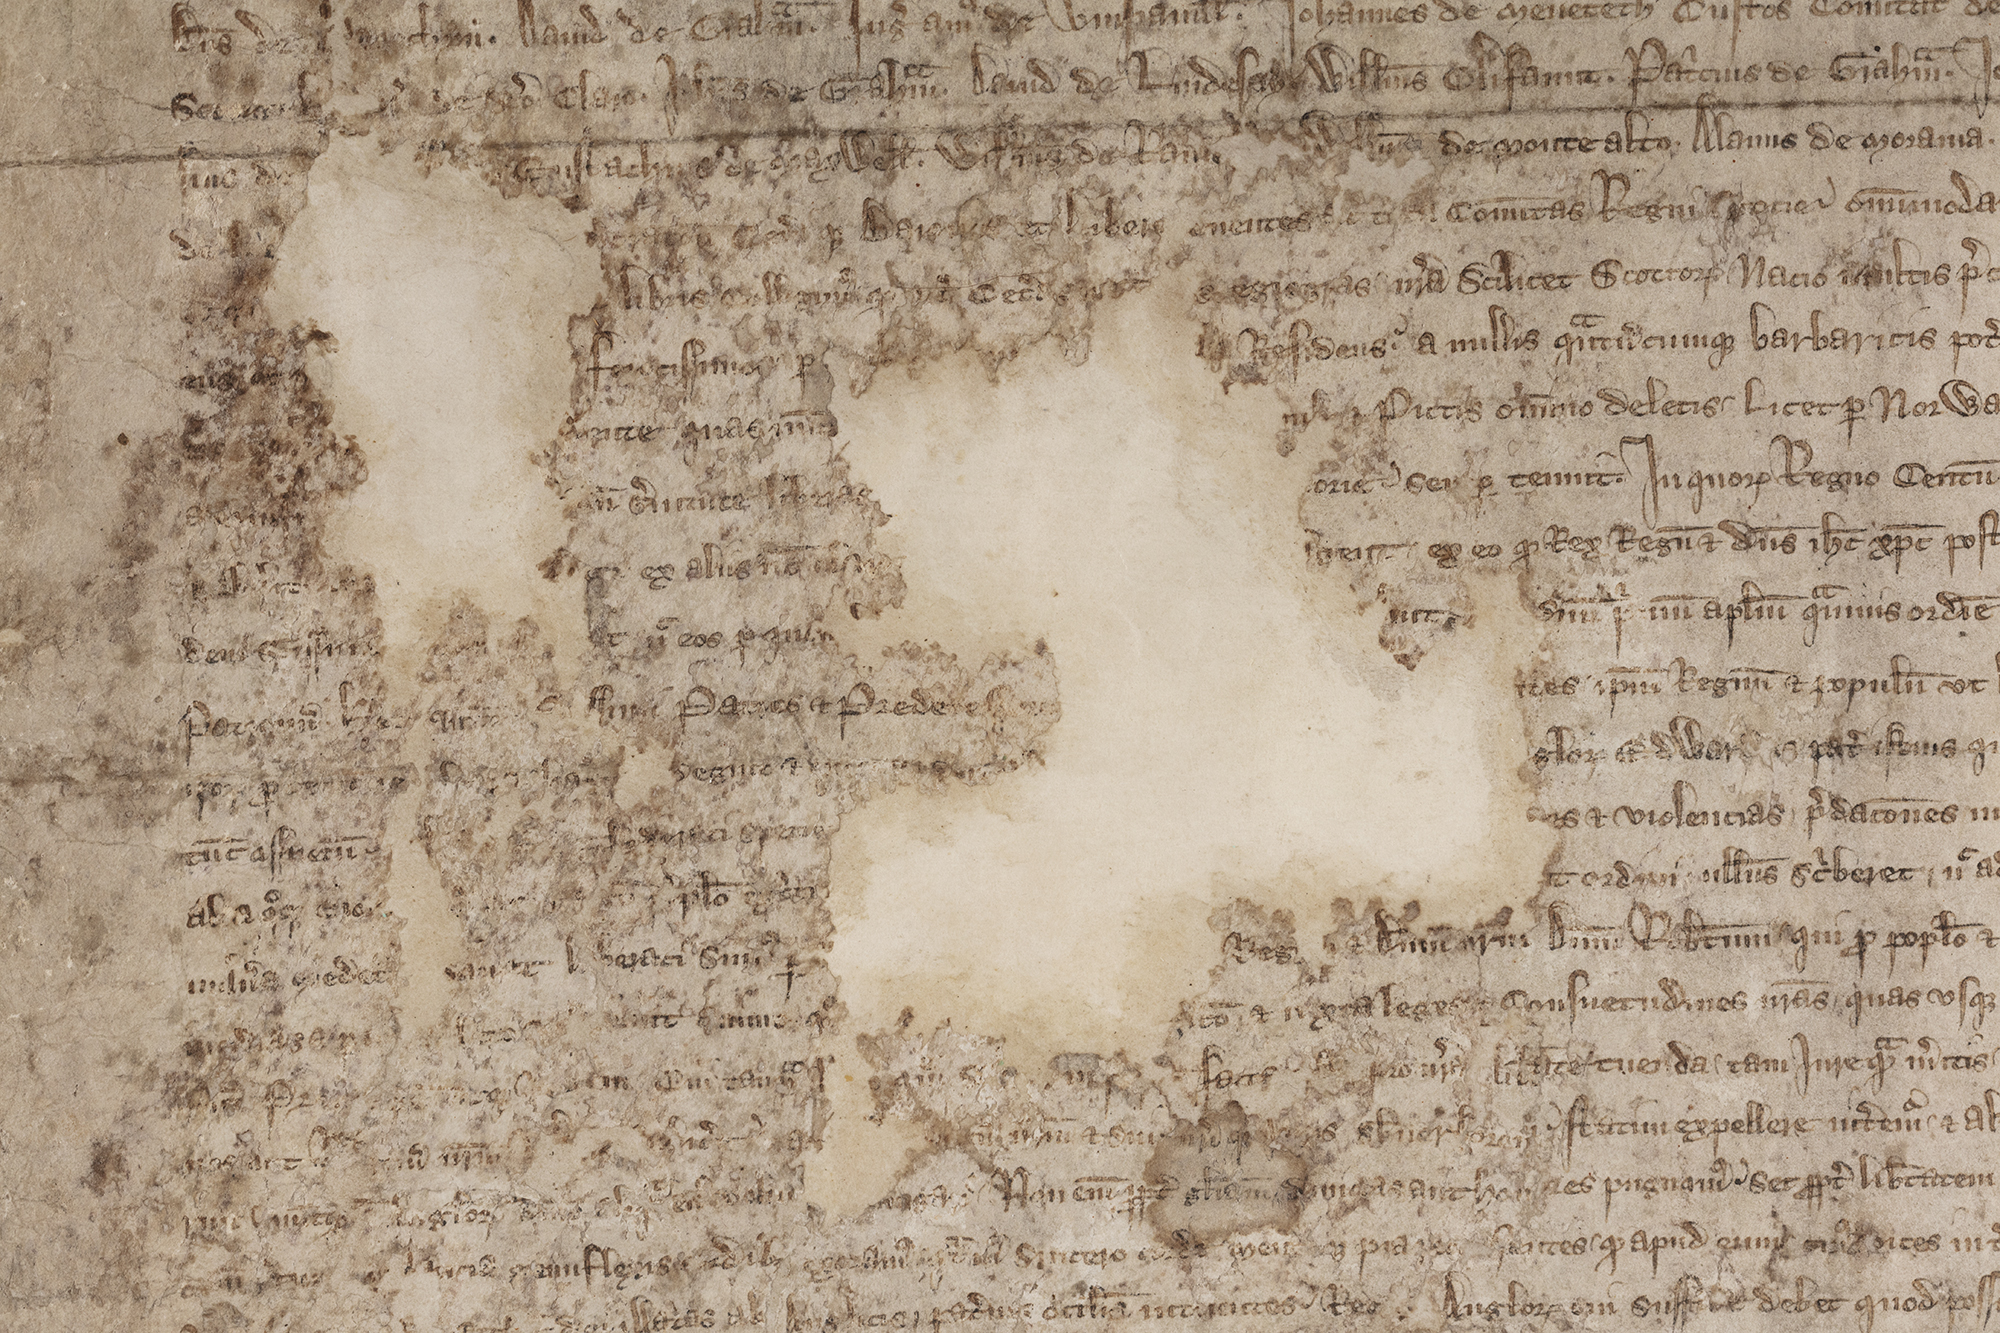 Image of detail of the Declaration of Arbroath showing damaged area